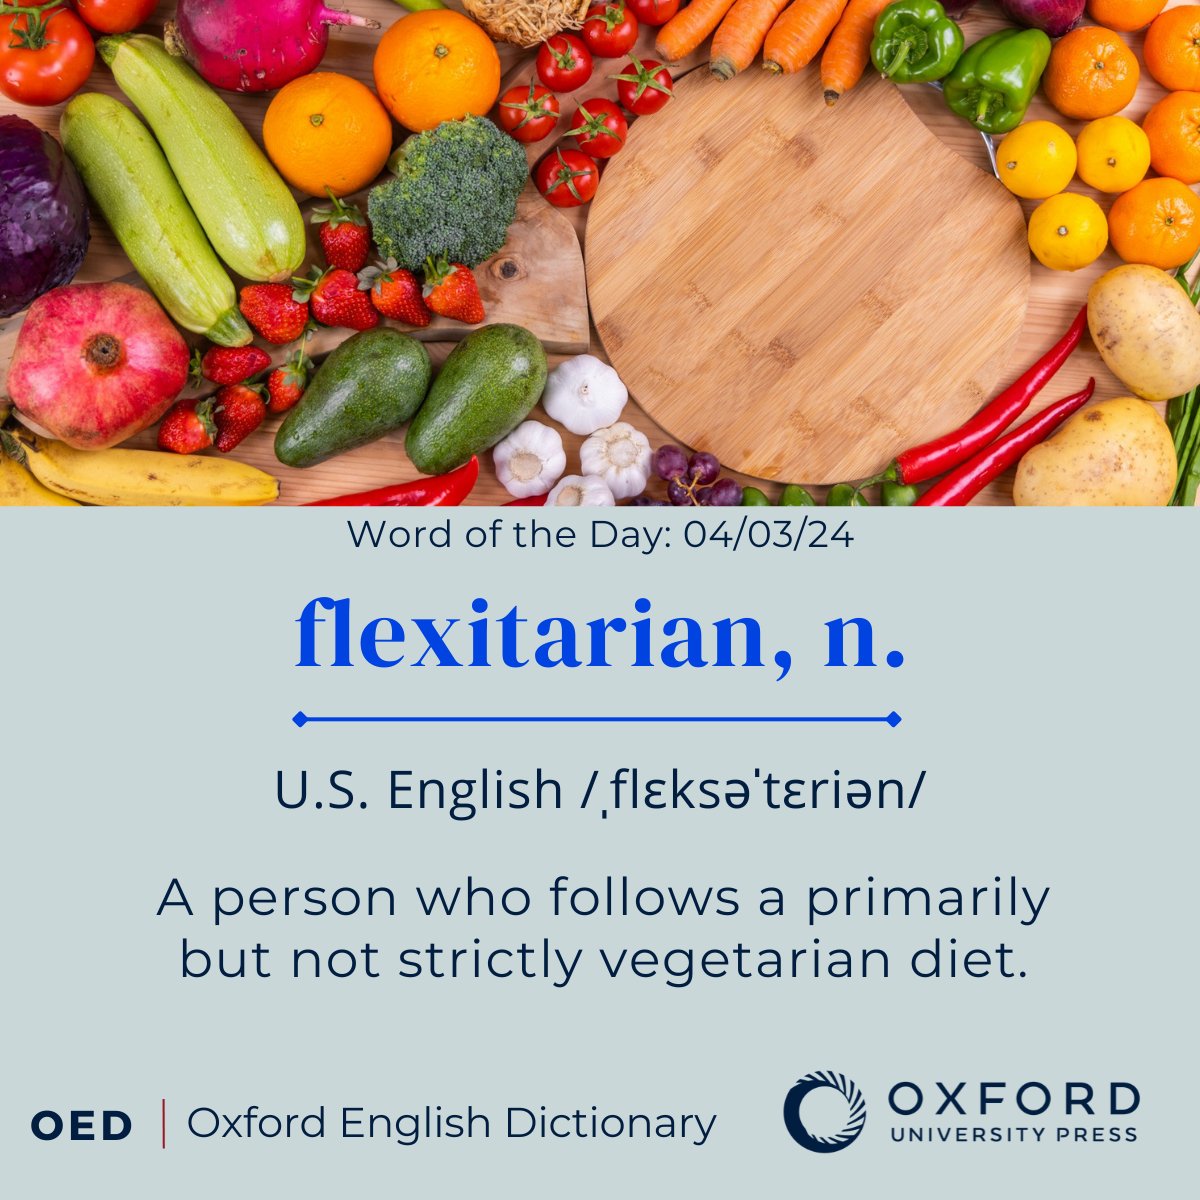 OED #WordOfTheDay: flexitarian, n. A person who follows a primarily but not strictly vegetarian diet.

View the OED entry: oxford.ly/4cq4PMy